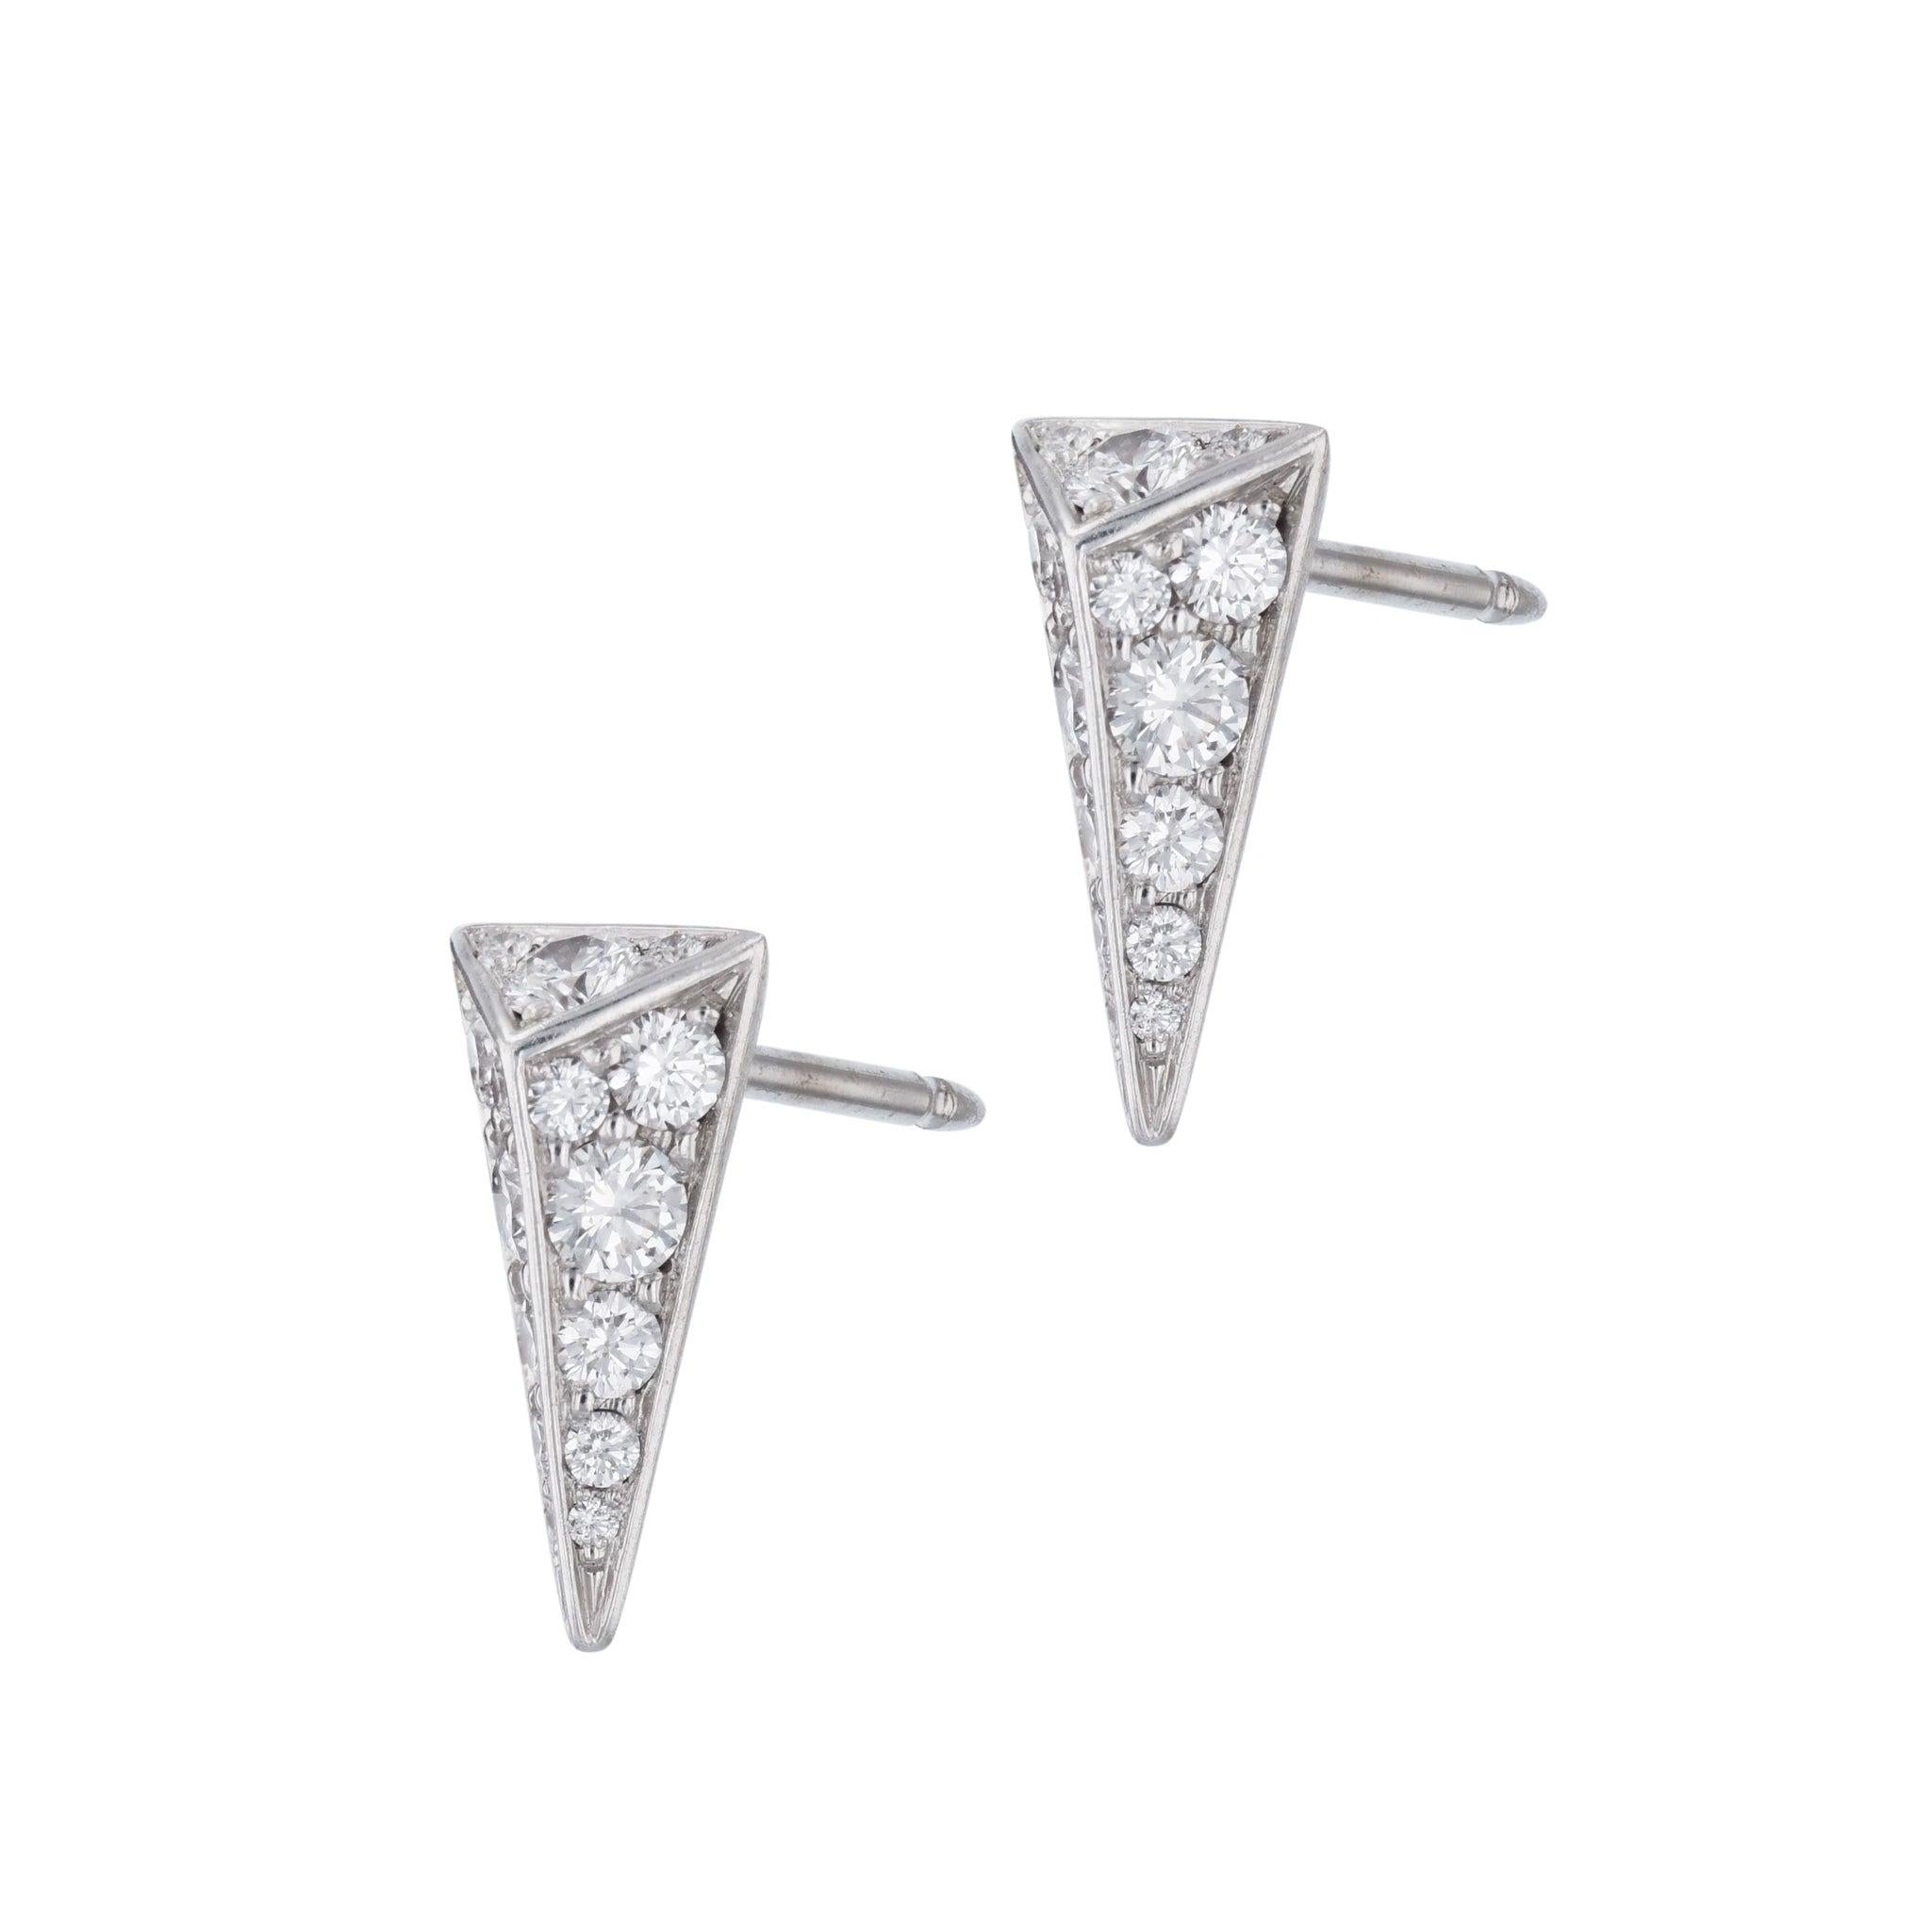 Experience breathtaking beauty with Kristen Farrel Estate Collection Diamond White Gold Earrings. Crafted with 18kt white gold, these earrings boast 26 diamonds, perfect addition to any outfit. Each pair comes with its own original pouch, making